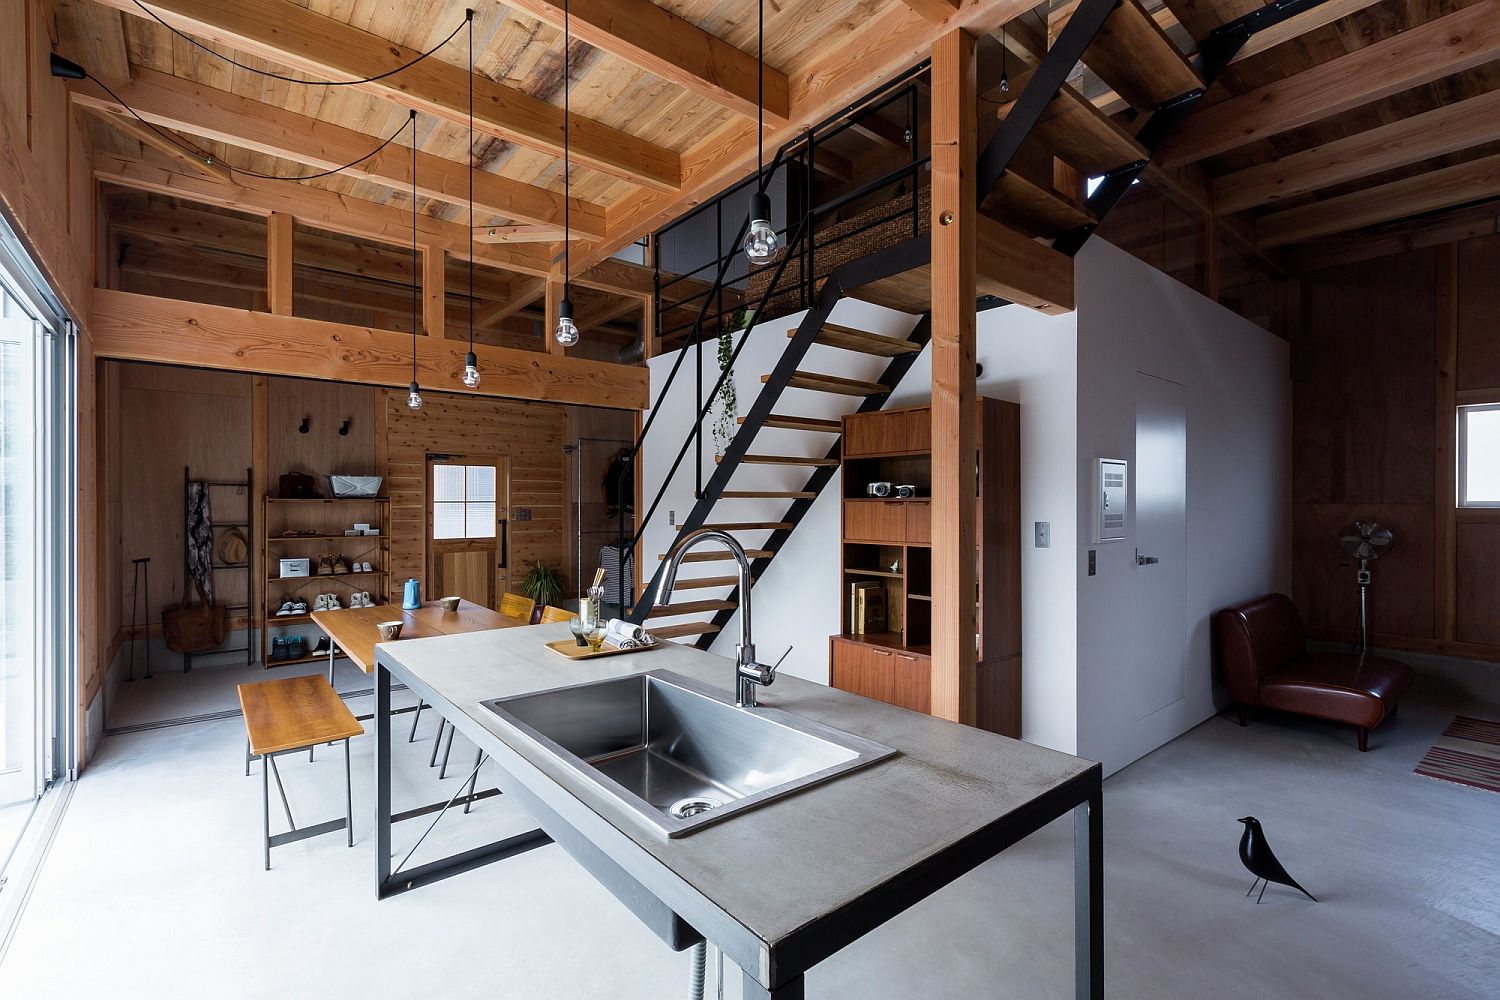 Interior of the home mimics the style and appeal of a renovated warehouse